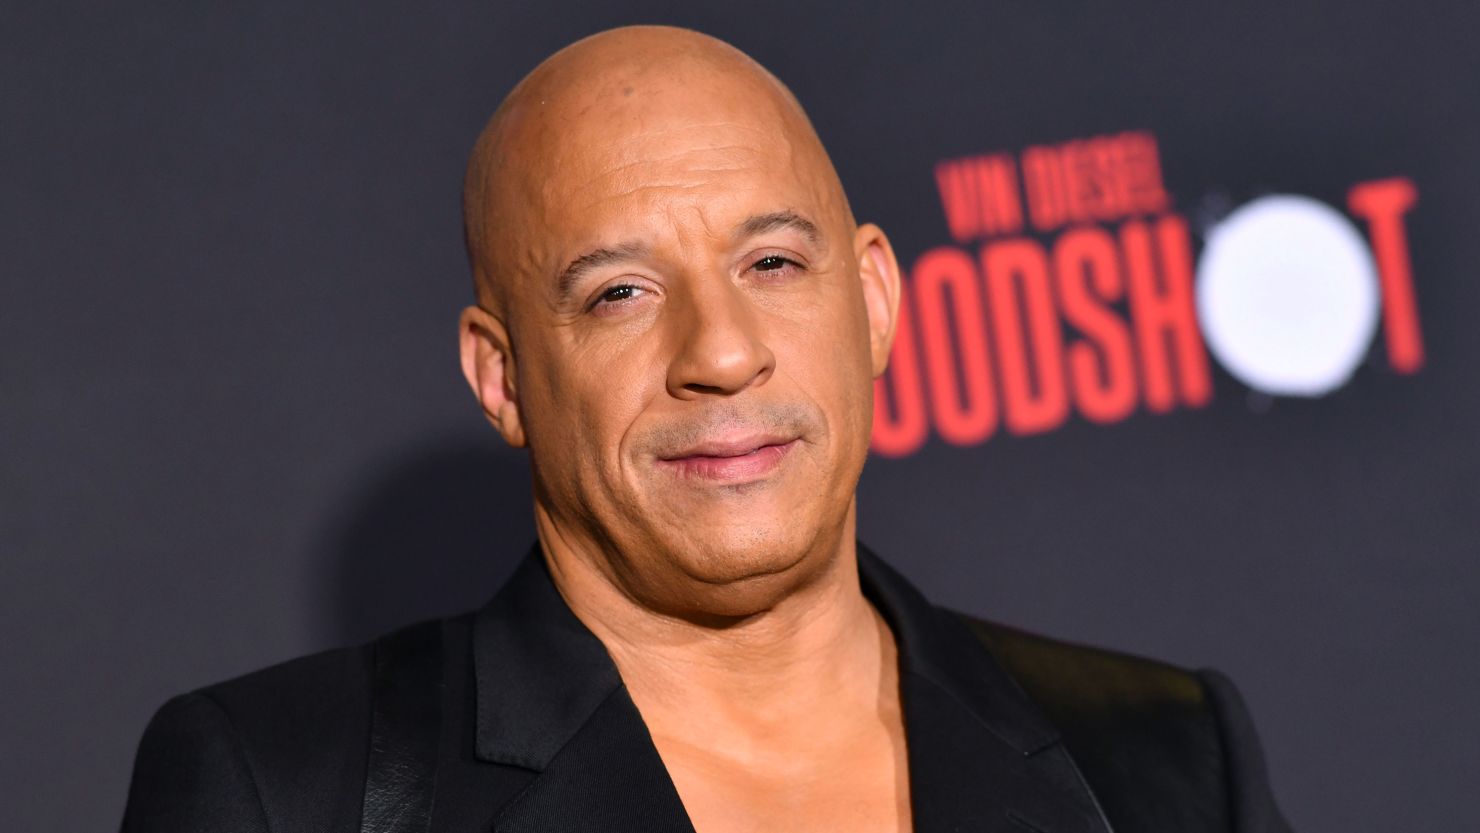 Vin Diesel partners with Kygo to release his first single 'Feel Like I Do